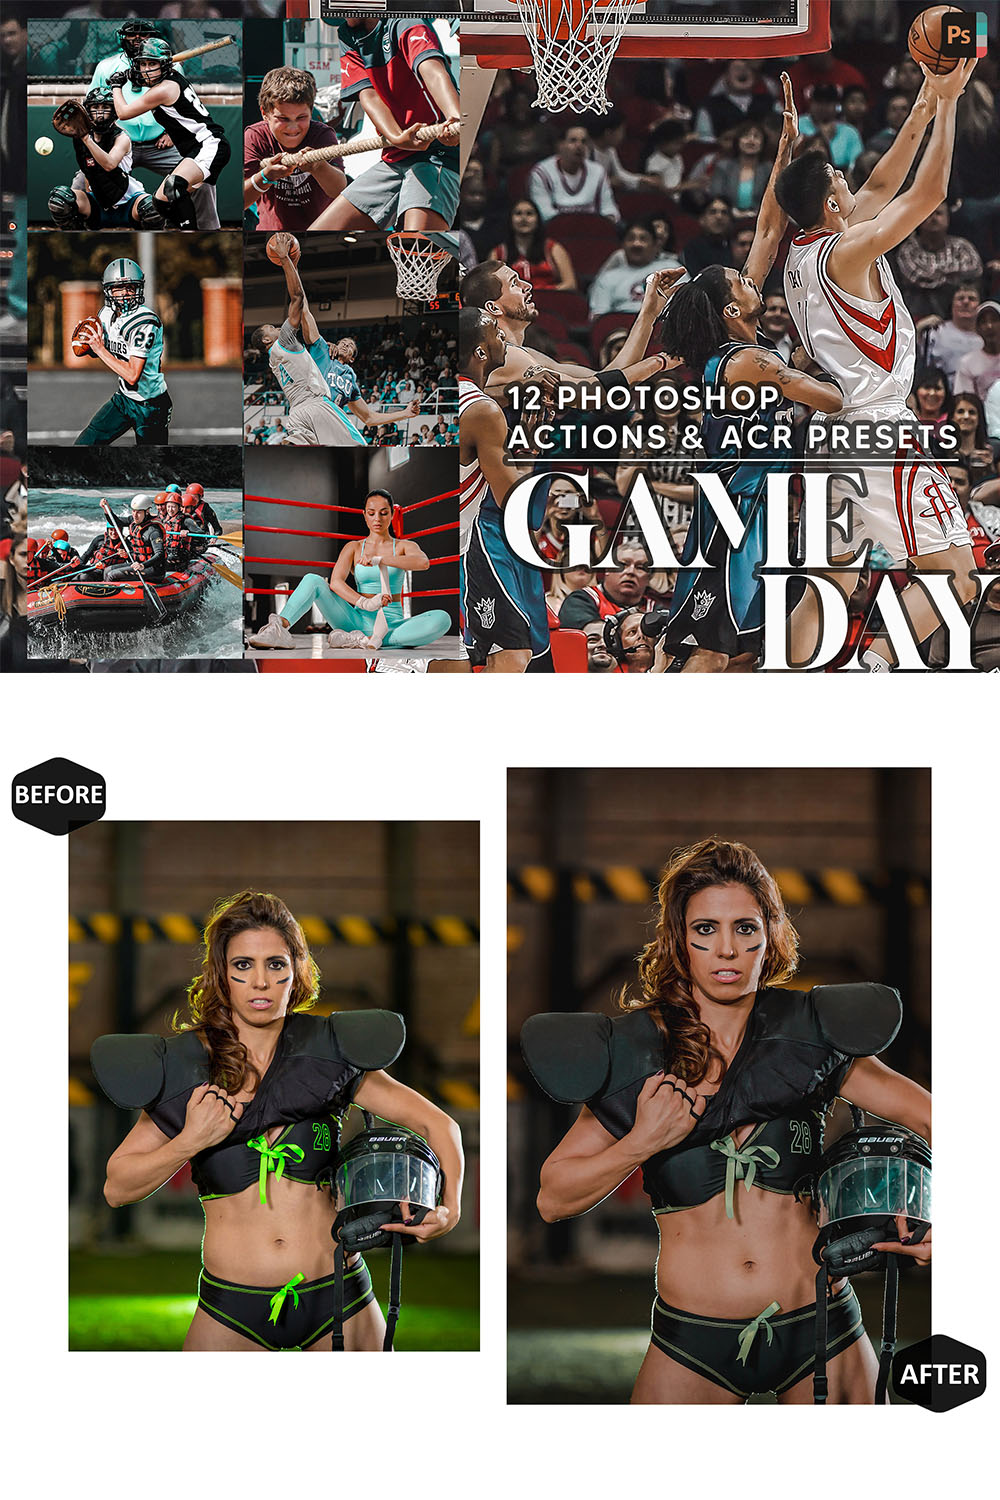 12 Photoshop Actions, Game Day Ps Action, Moody Stadium ACR Preset, Basketball Ps Filter, Atn Portrait And Lifestyle Theme For Instagram, Blogger pinterest preview image.